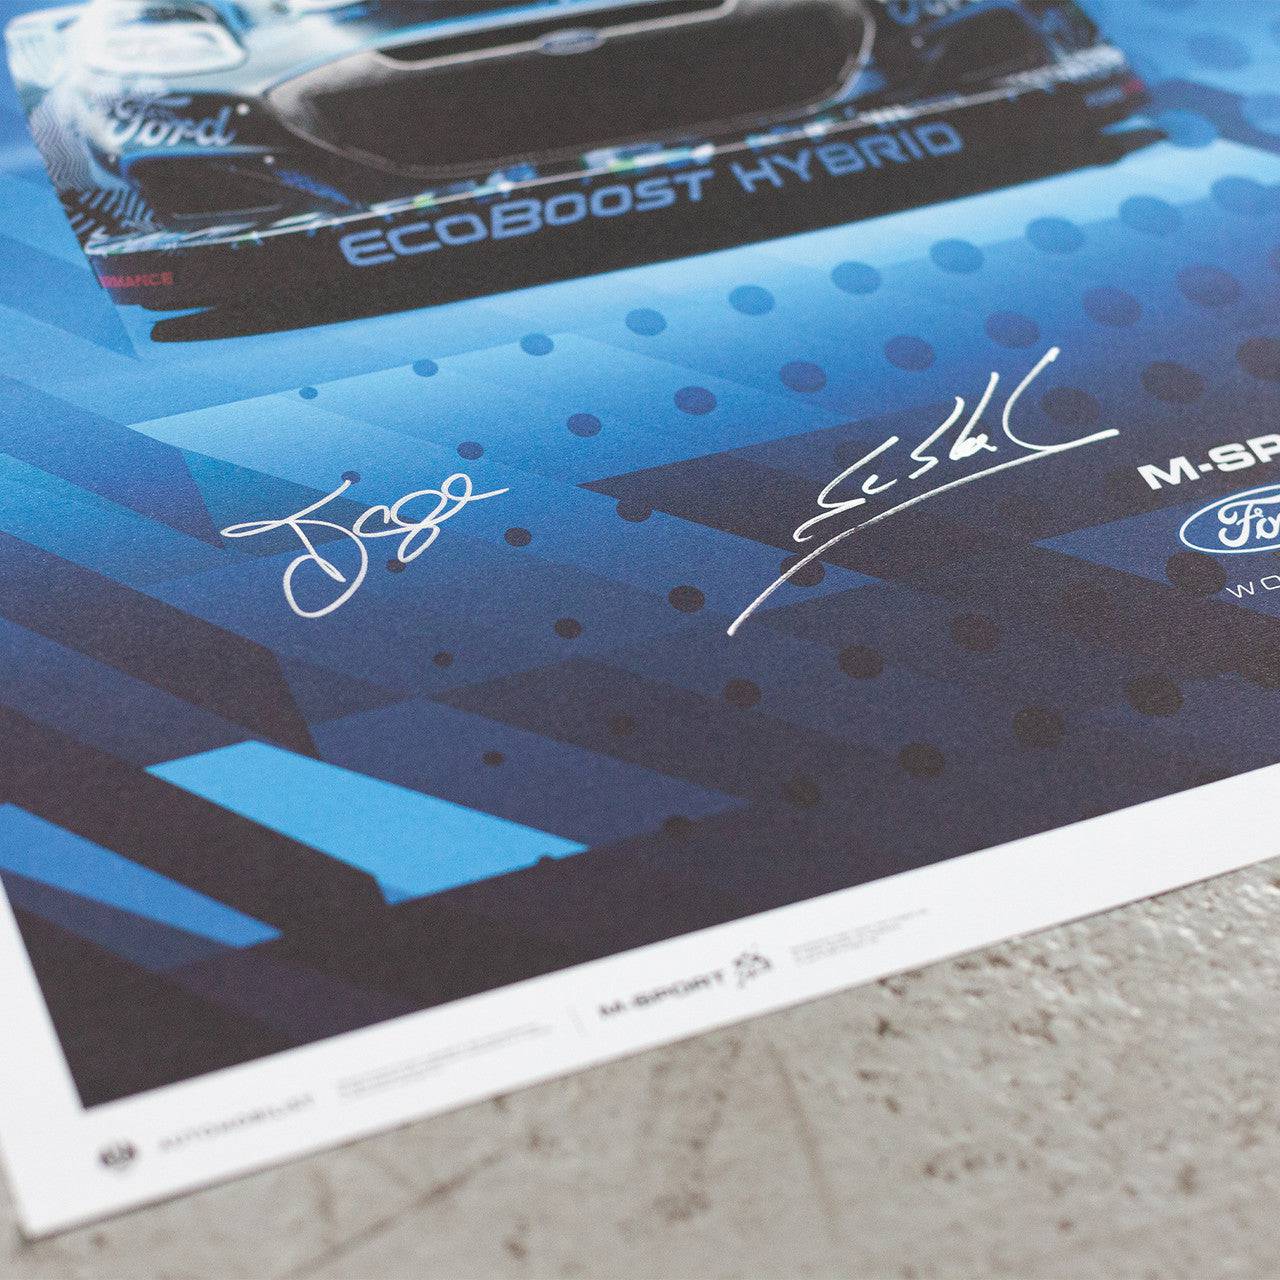 Sébastien Loeb and Isabelle Galmiche - M-Sport Ford Puma Hybrid Rally1 | Signed Limited Edition